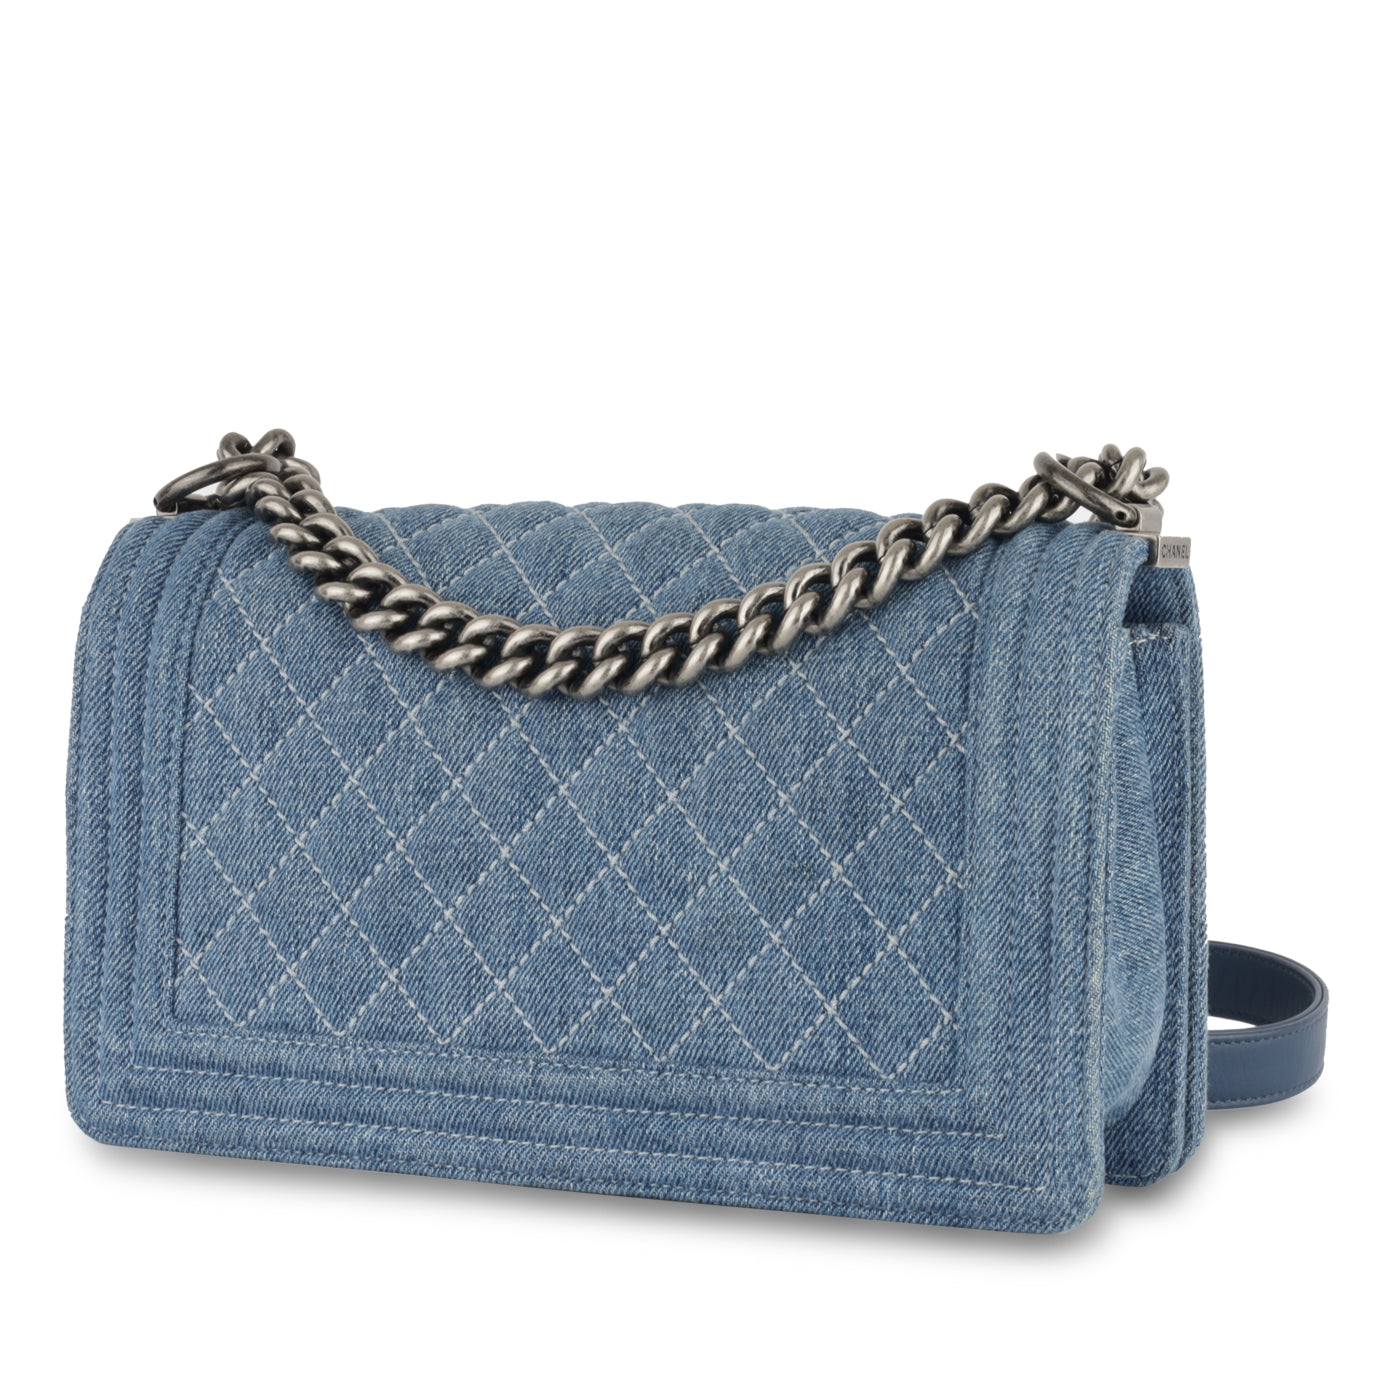 London UK 11 March 2020 Chanel Union Jack shoulder bag and matching belt,  estimate £2,000 – 3,000. The bag crafted in quilted dark blue suede, red  and white lambskin and pale matt